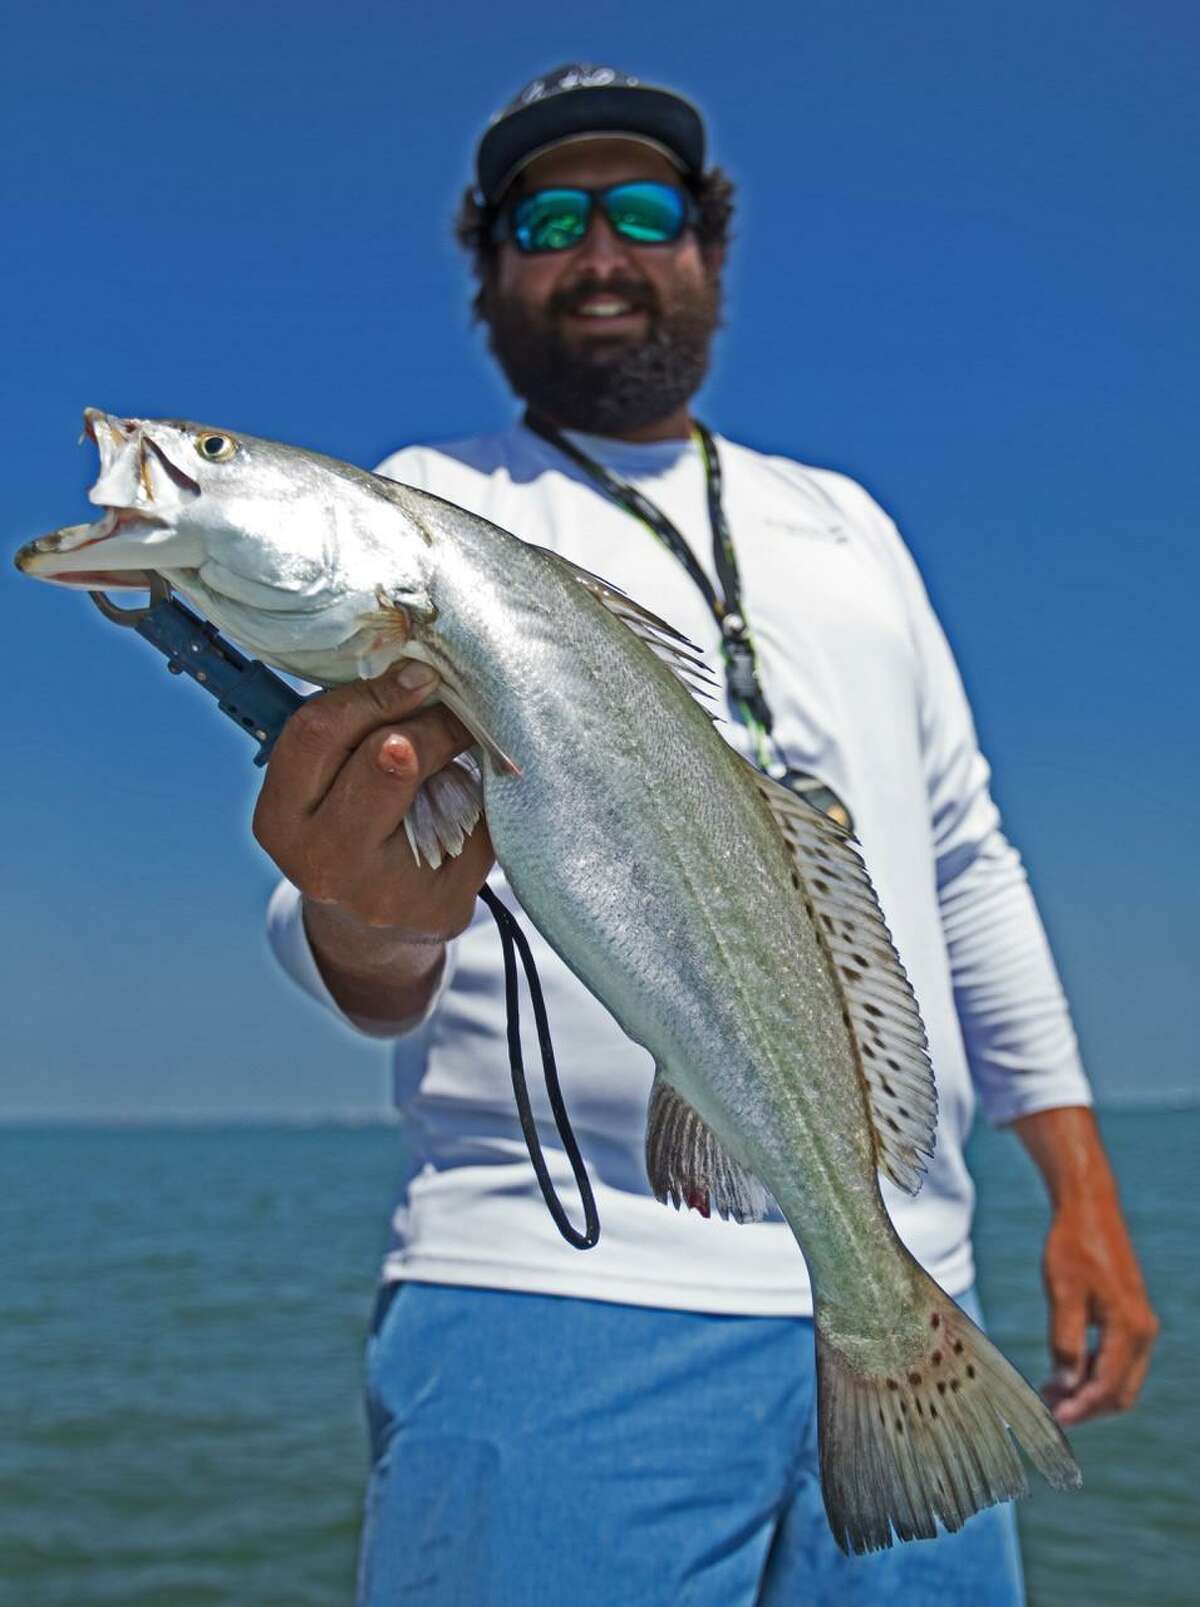 On a fishing journey that started before dawn off the tip of the South Jetty at Port Aransas, Capt. Jared McCulloch escaped crowds and searched for fish until ending up at an oil rig in Corpus Christi Bay that produced this 21-inch speckled trout.